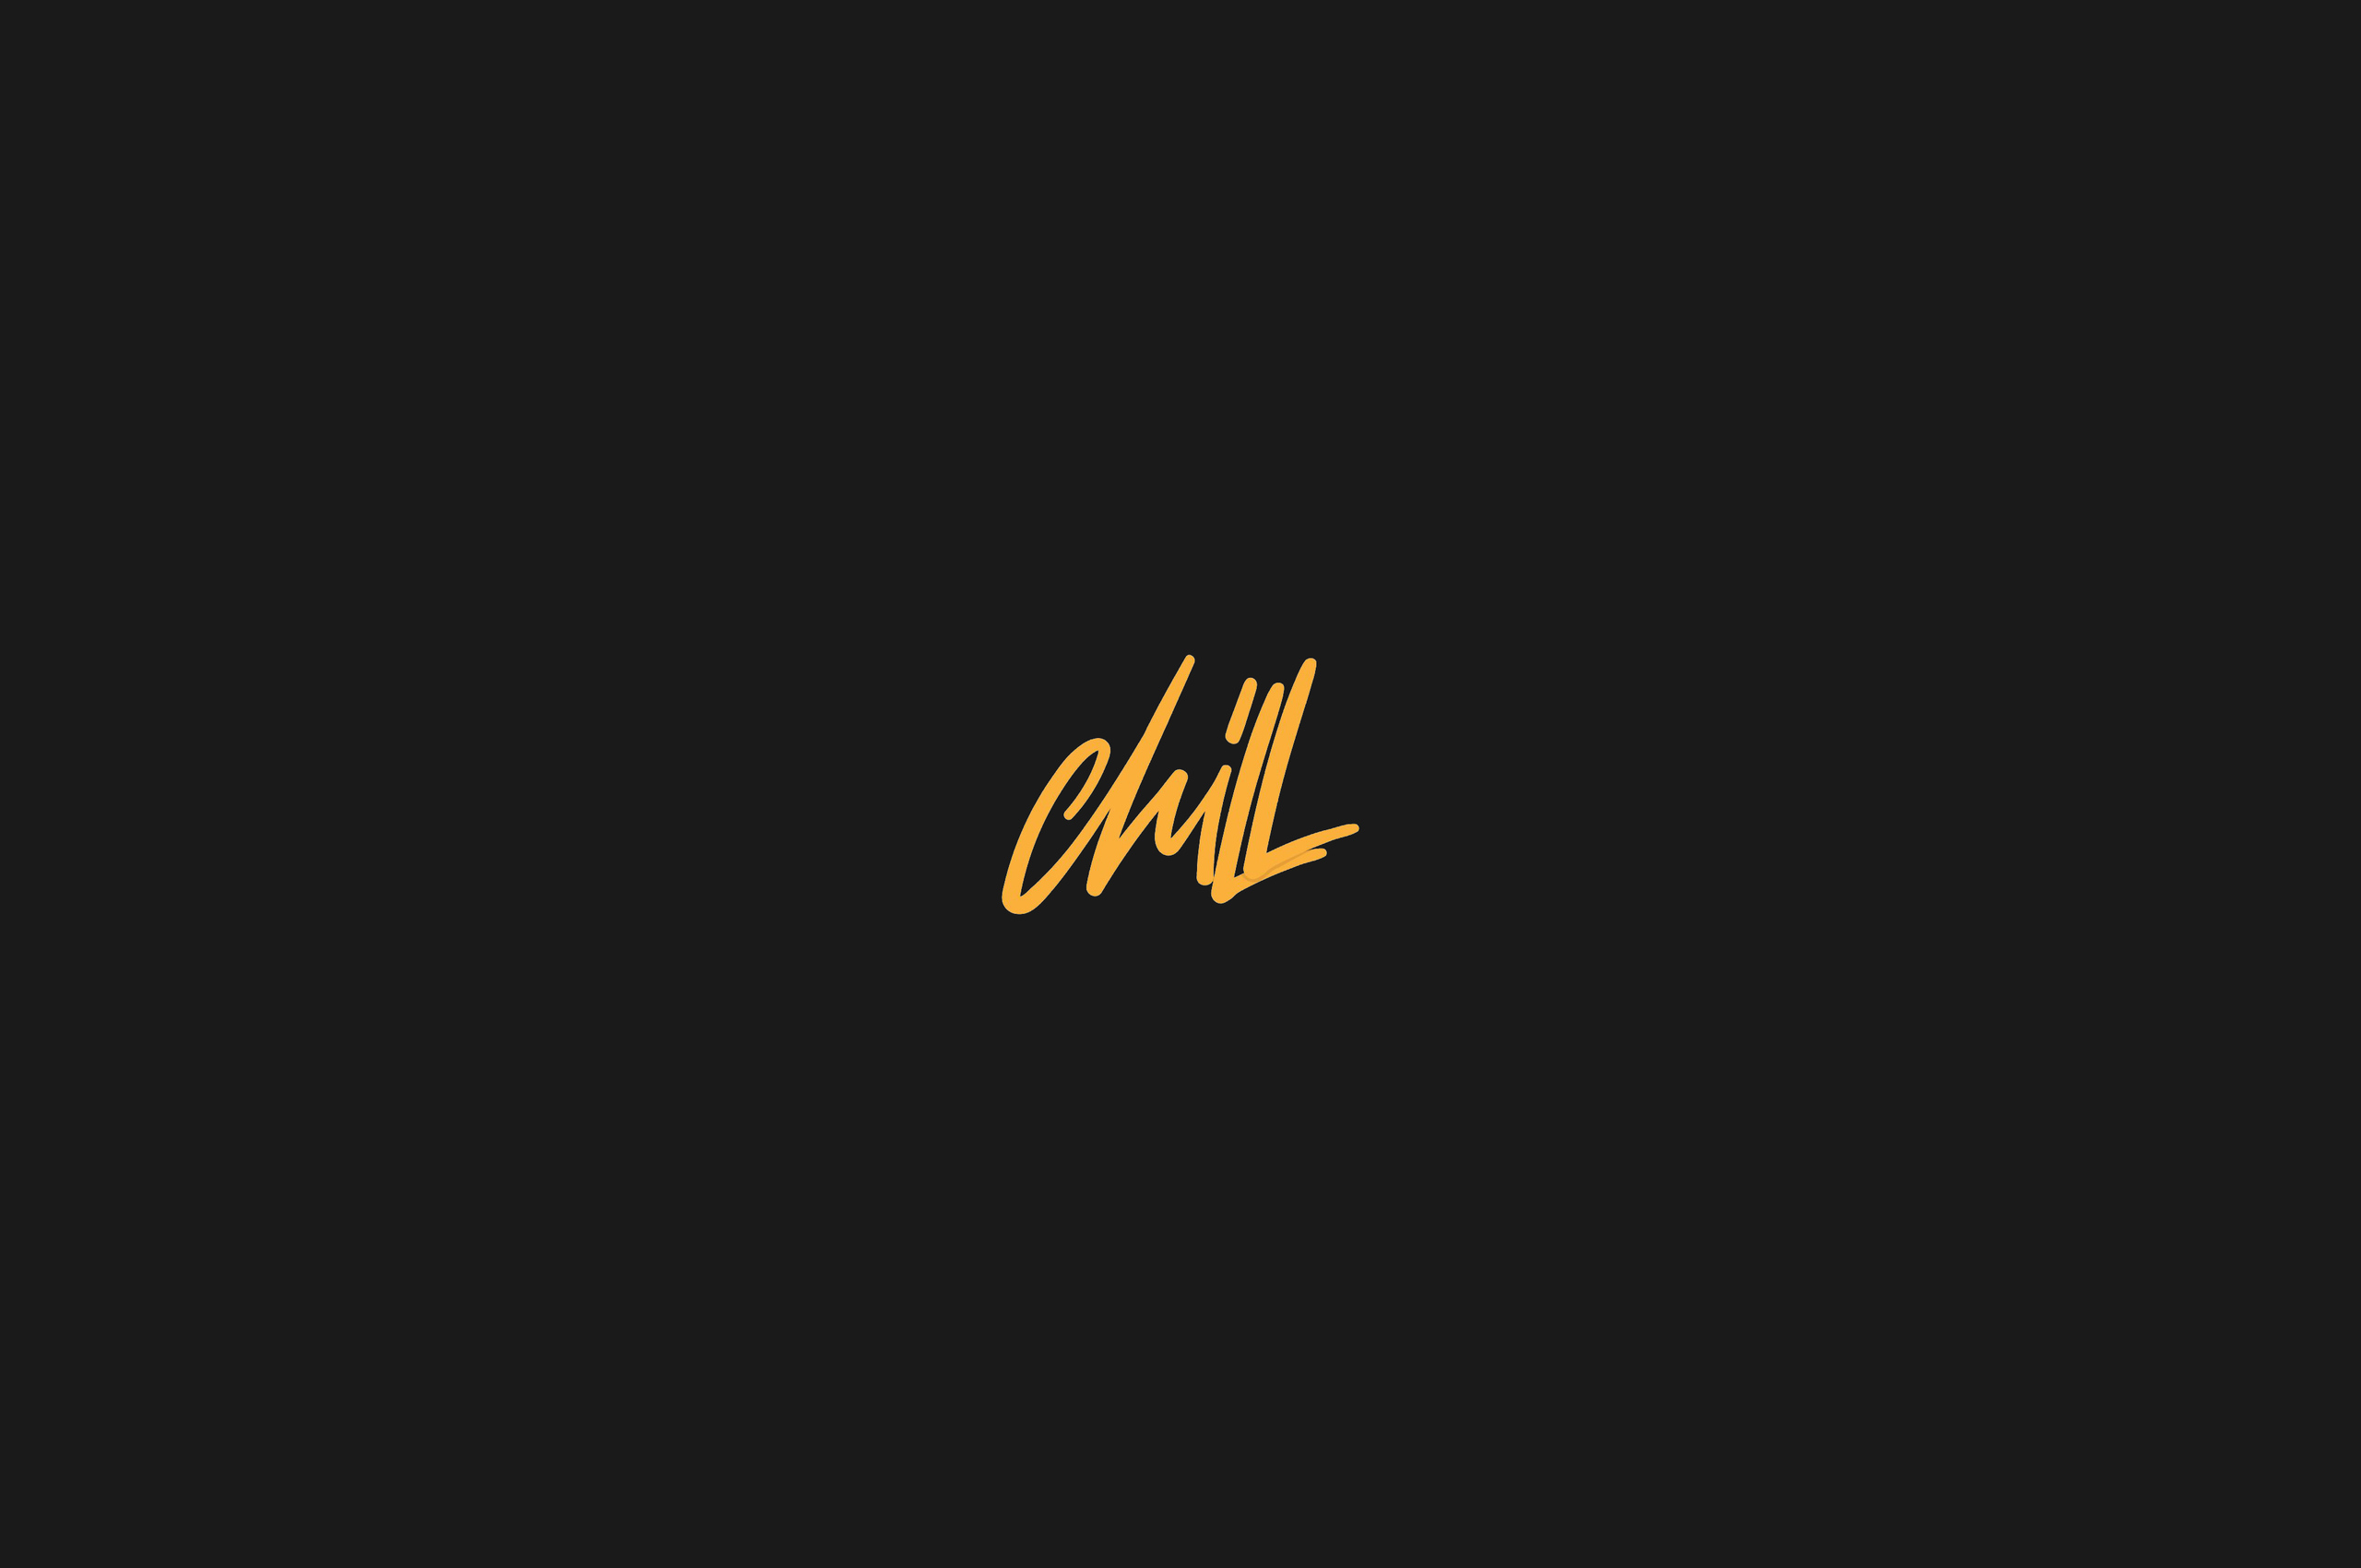 A black background with the word chill in gold - Chromebook